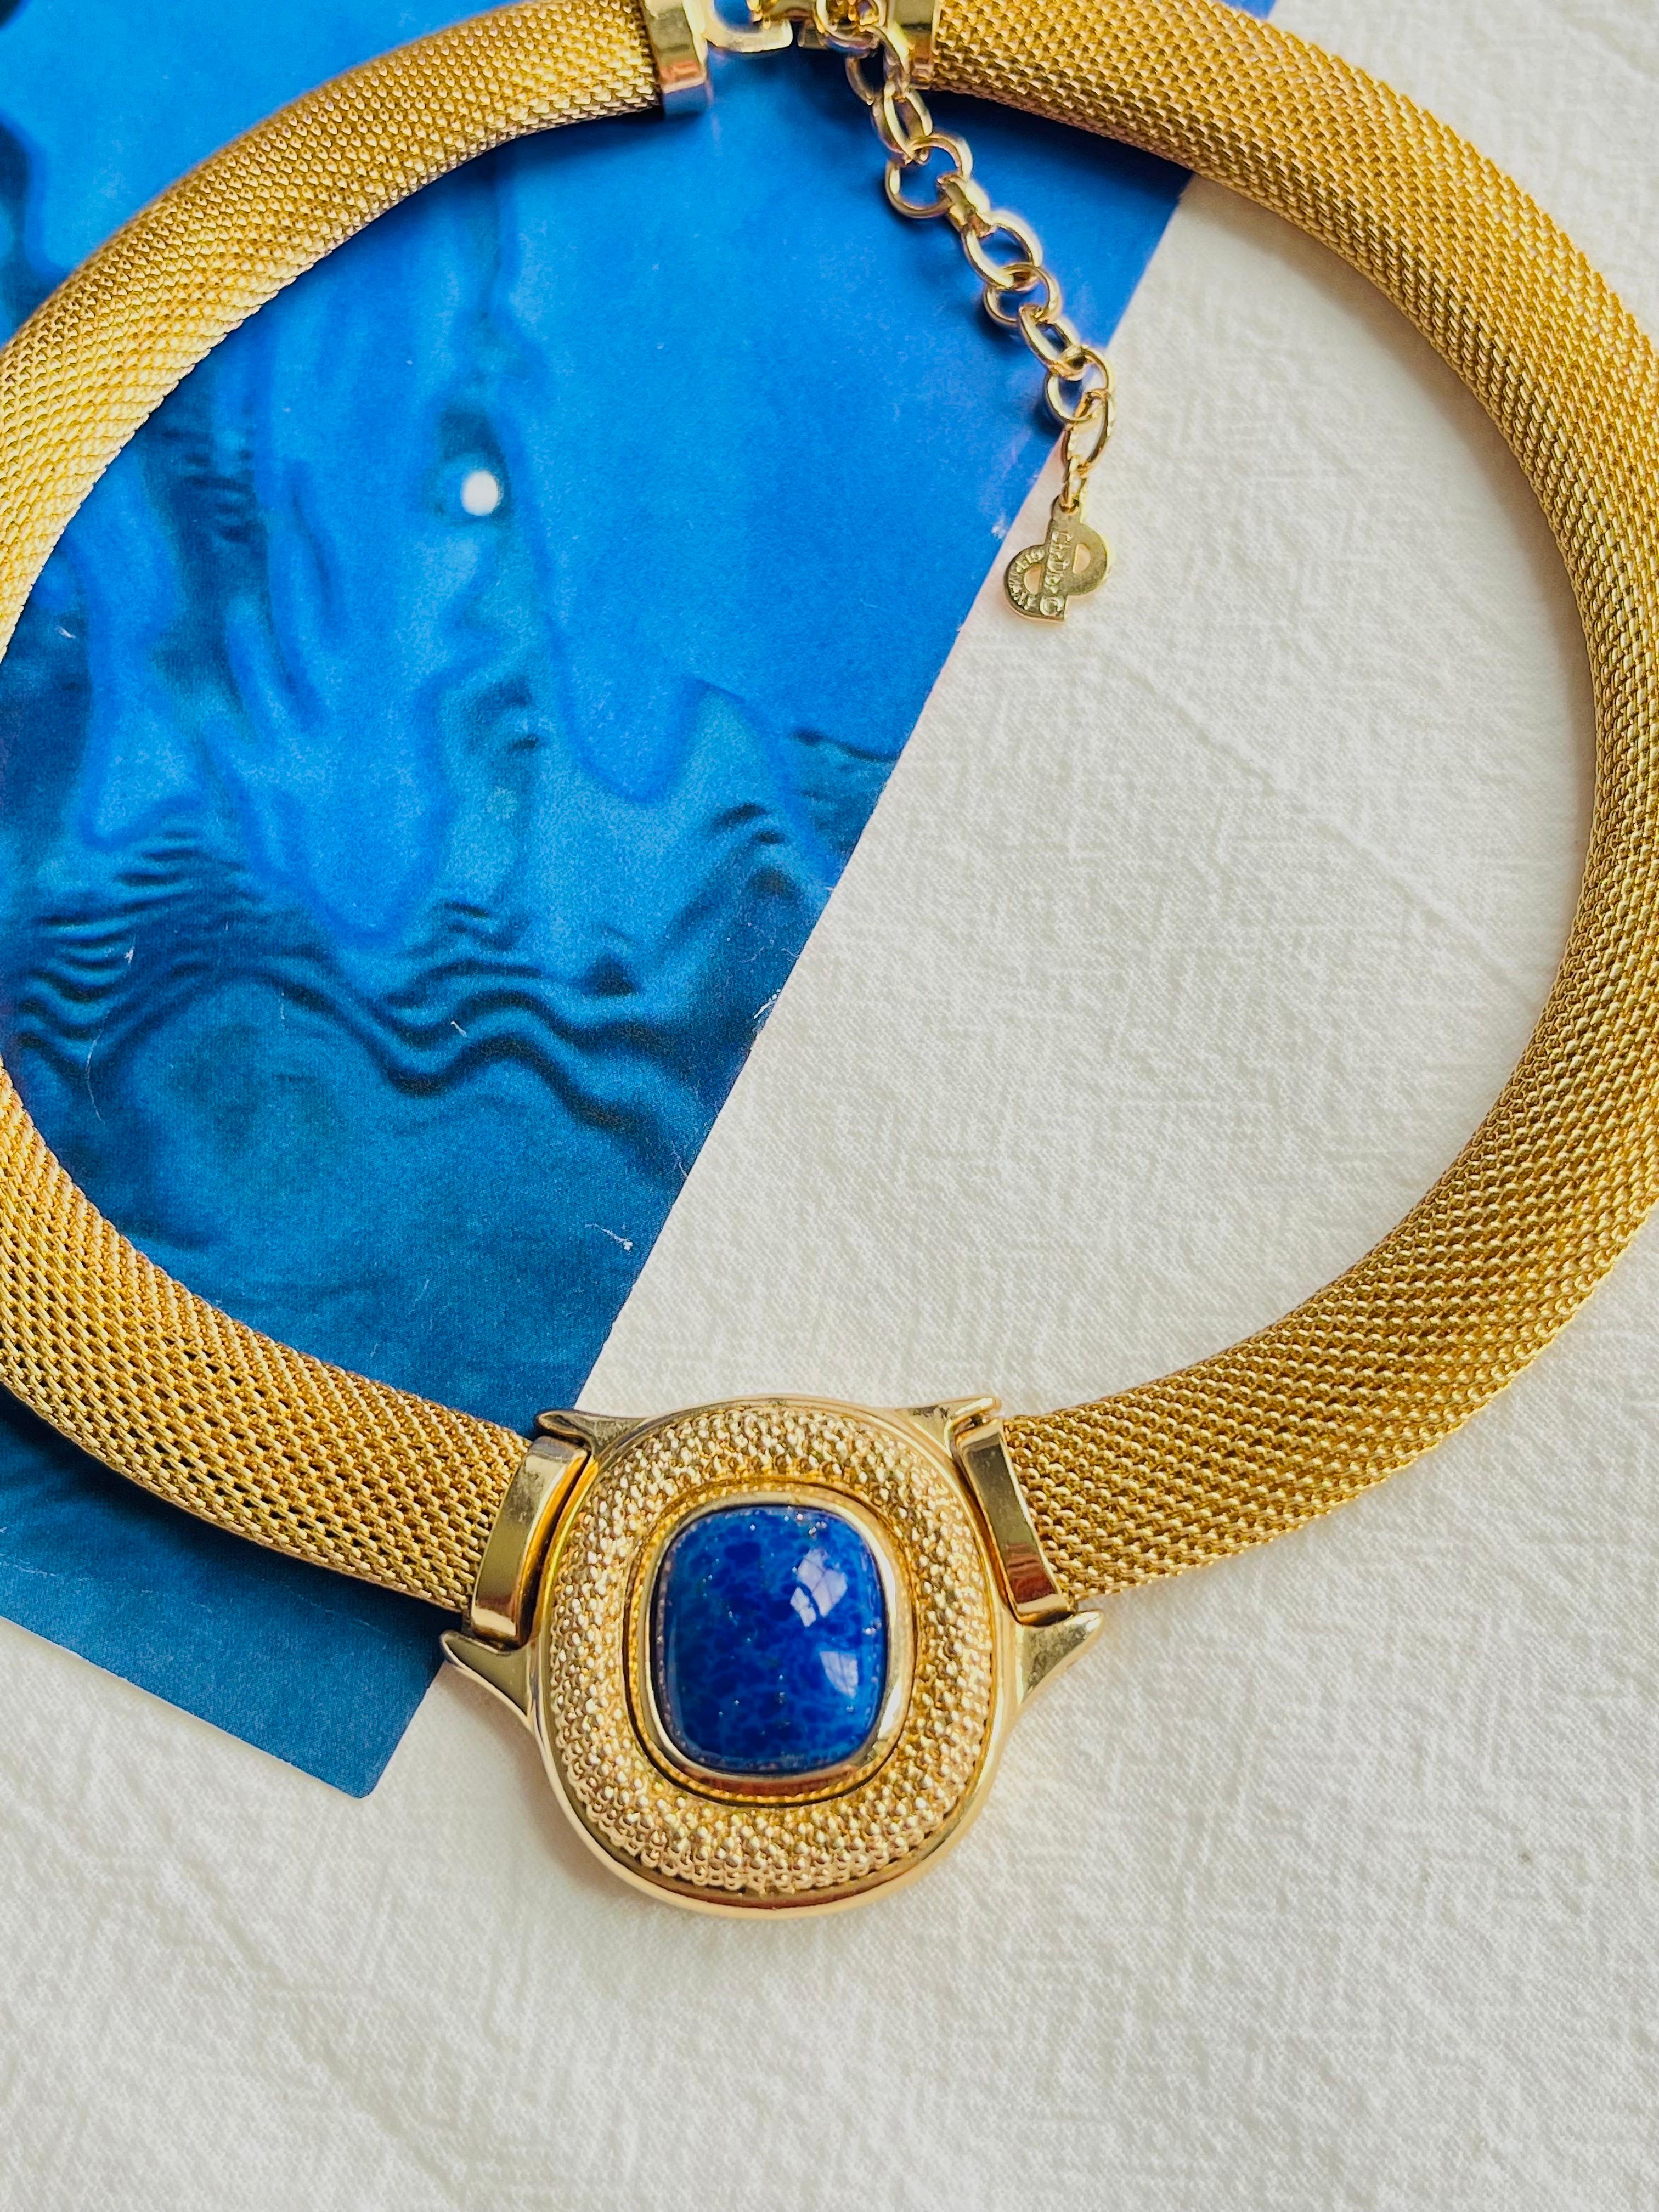 Women's Christian Dior GROSSE 1960s Lapis Navy Cabochon Pendant Chunky Mesh Necklace For Sale